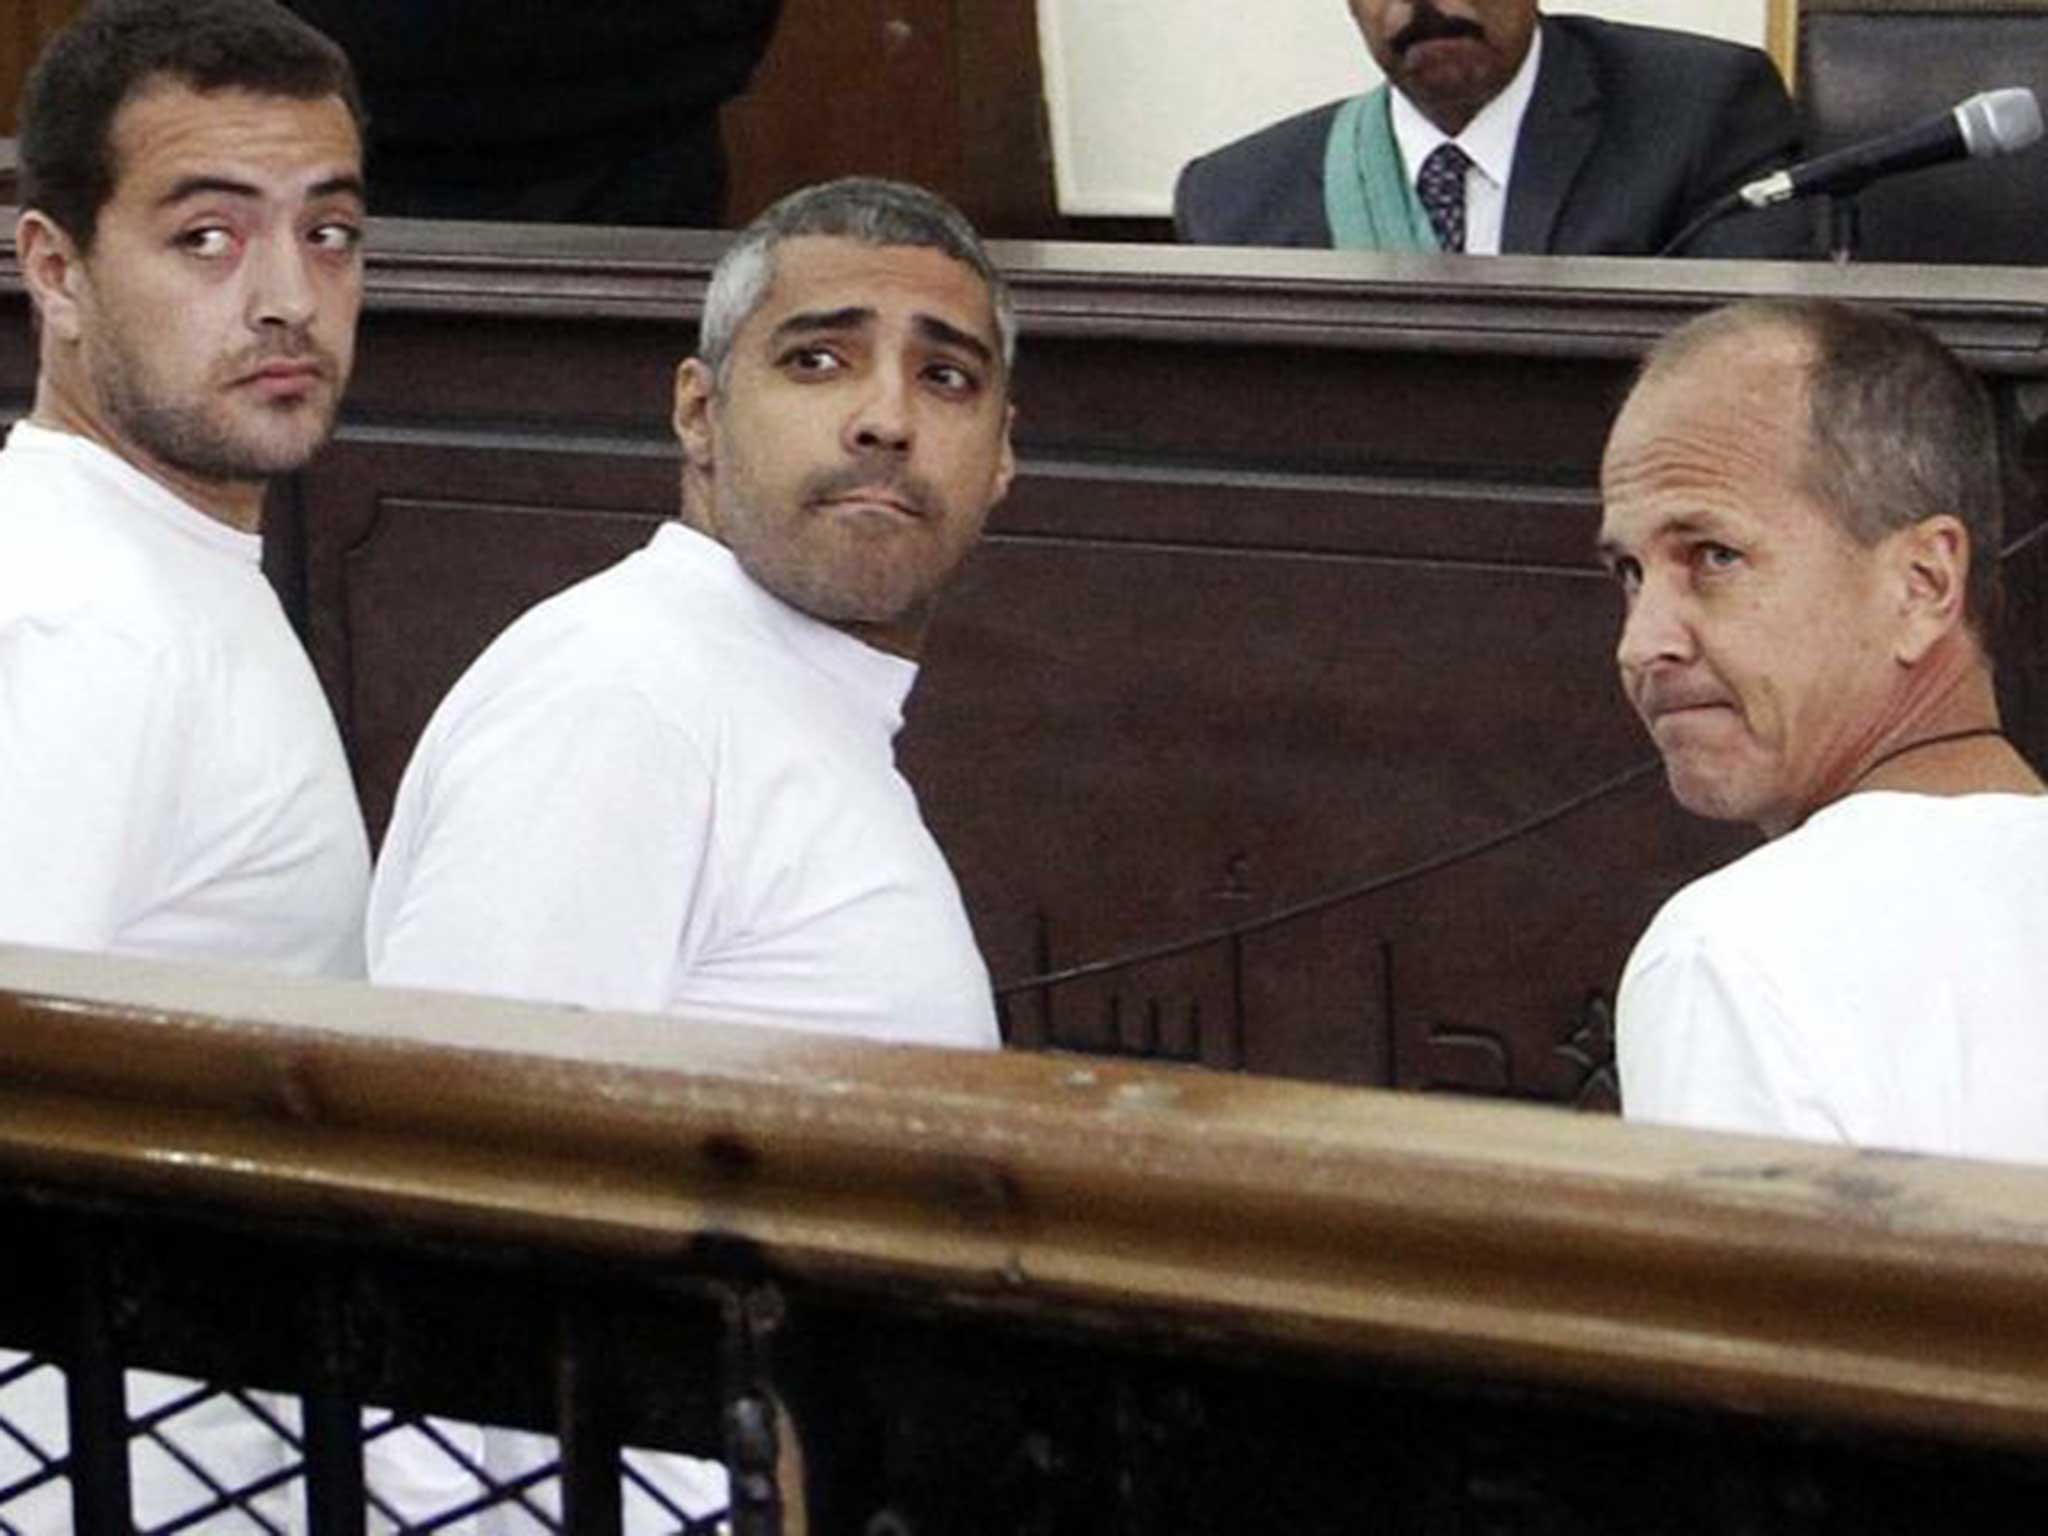 Baher Mohamed,Mohammed Fahmy and correspondent Peter Greste (from left to right)